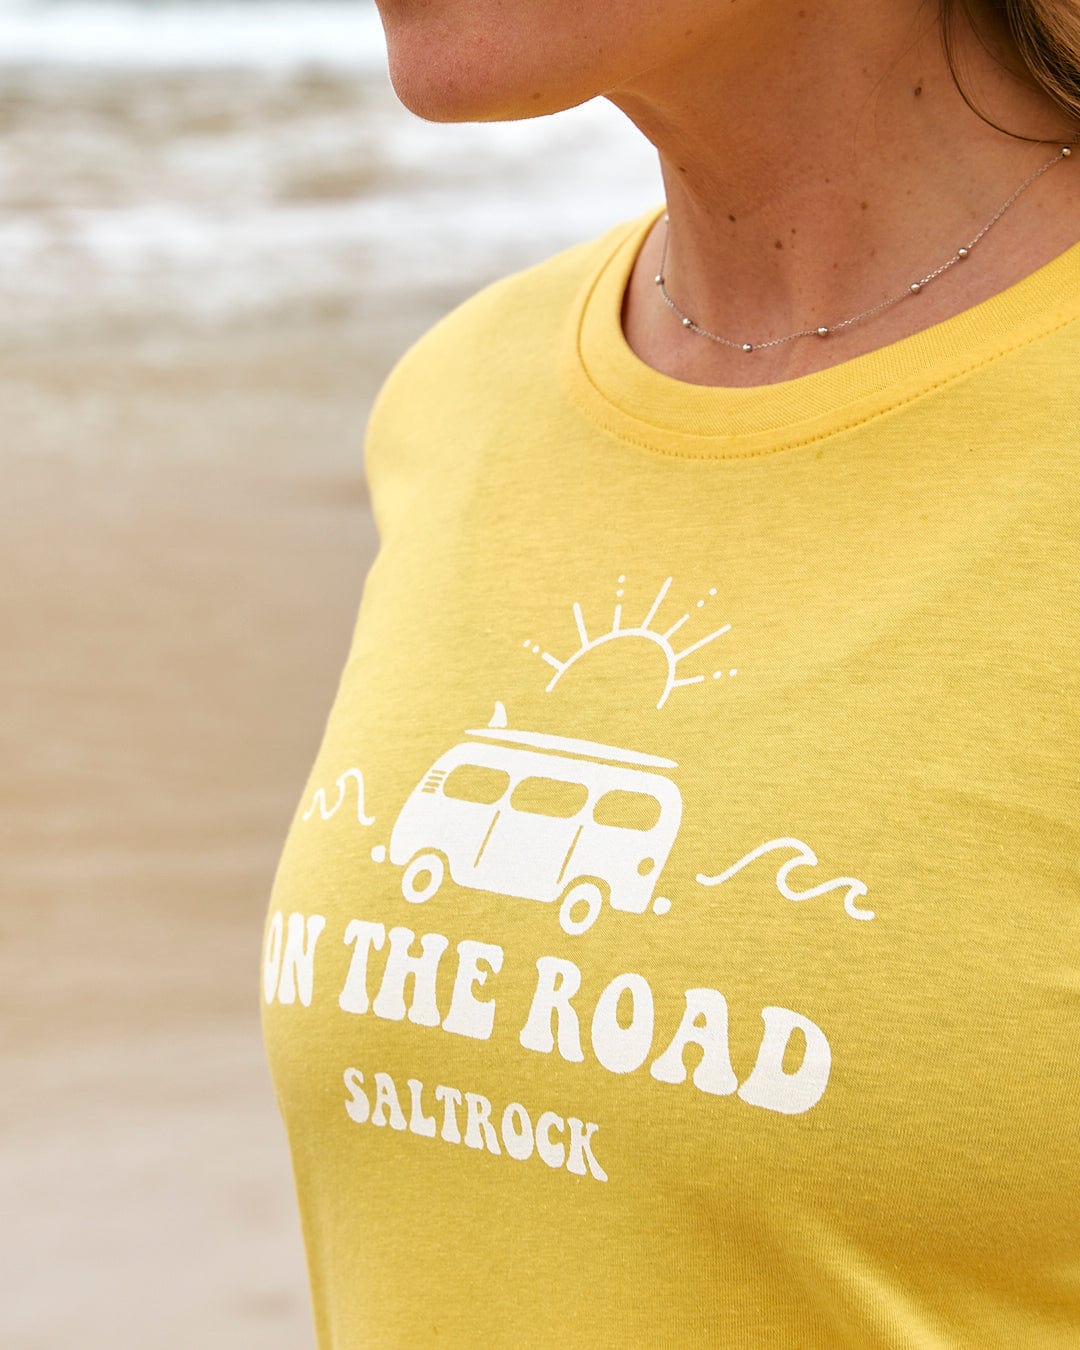 A woman wearing a yellow t-shirt that says 